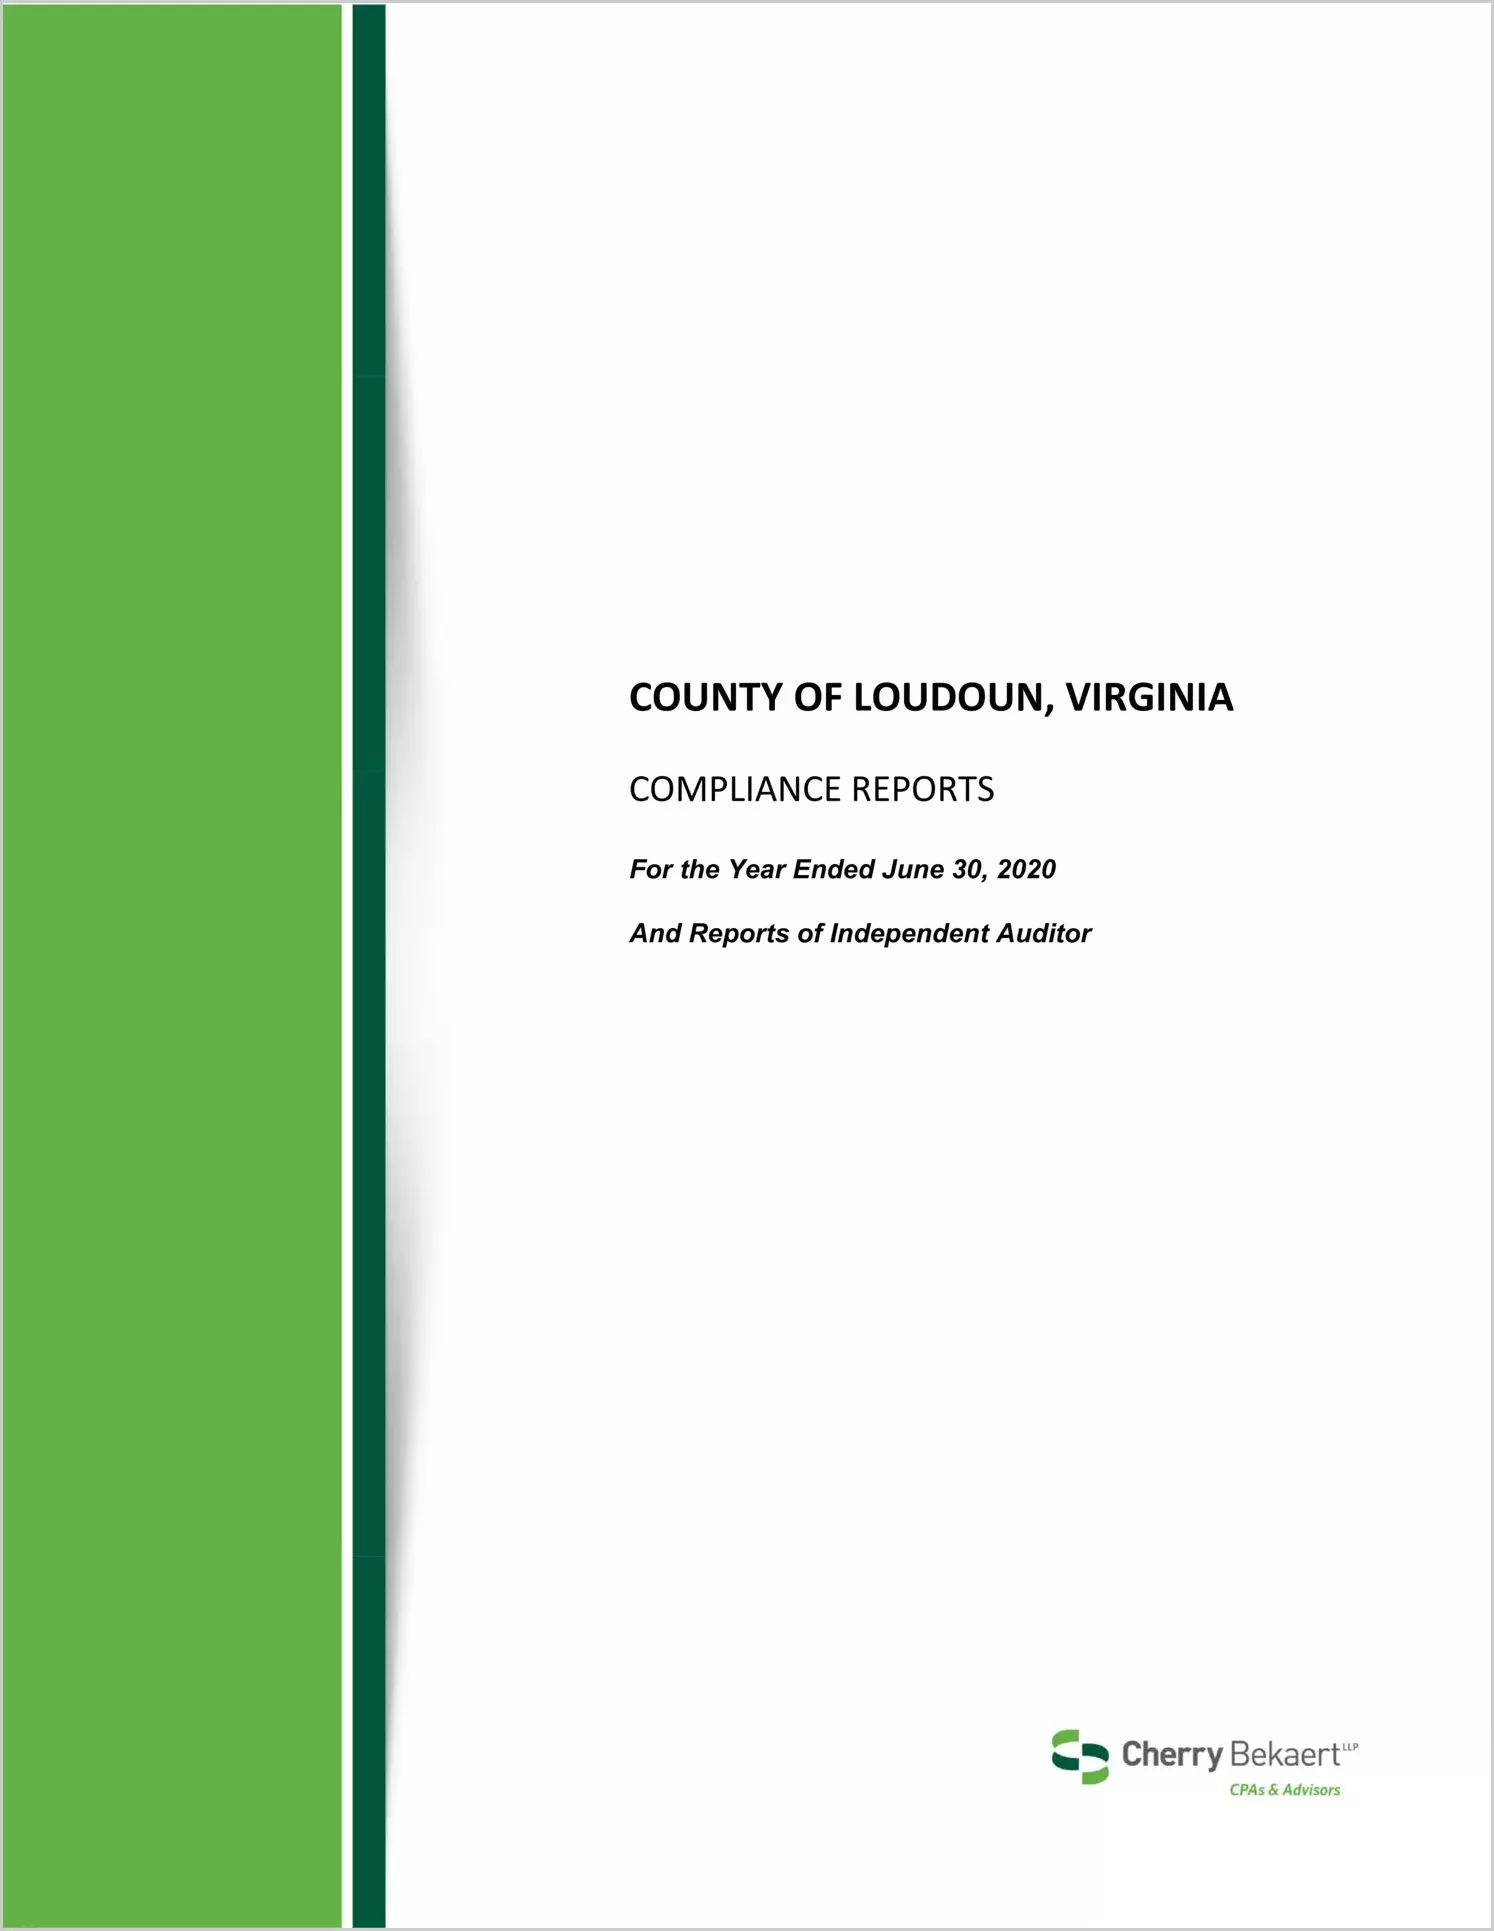 2020 Internal Control and Compliance Report for County of Loudoun